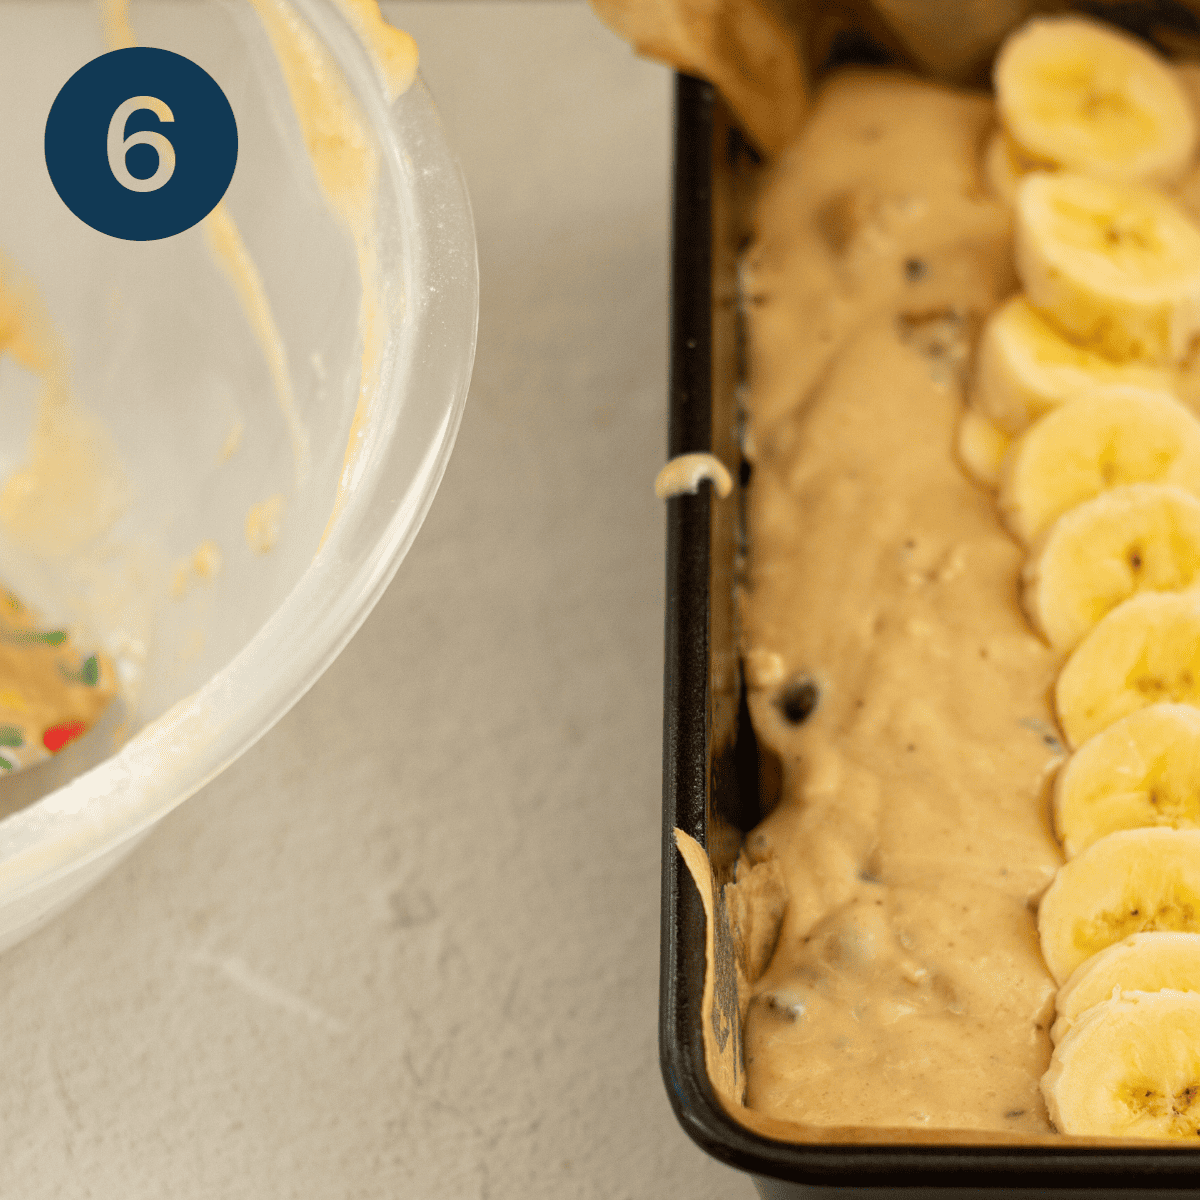 Pour banana bread batter into a prepared loaf tin.